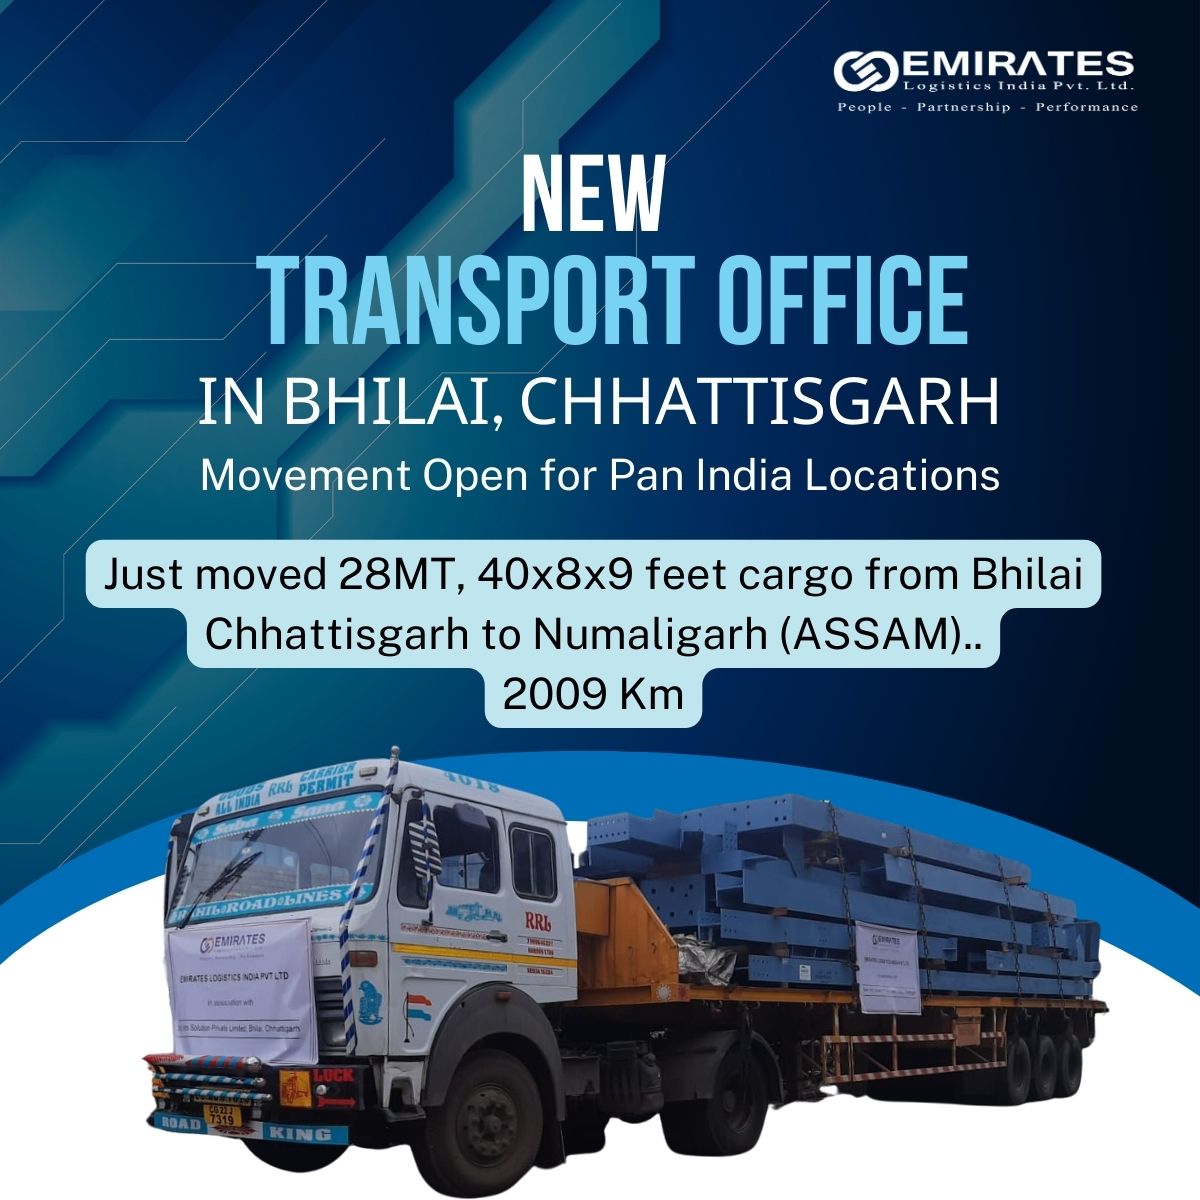 We start Domestic ~ Surface Transport from our newest Centre #Bhilai #Chhattisgarh especially to cater to the Metal Industry.
Our first transport parcel travelled to #Assam covering distance of 2000+Kms

We are open to #SurfaceTransport opportunities on Pan India basis!!